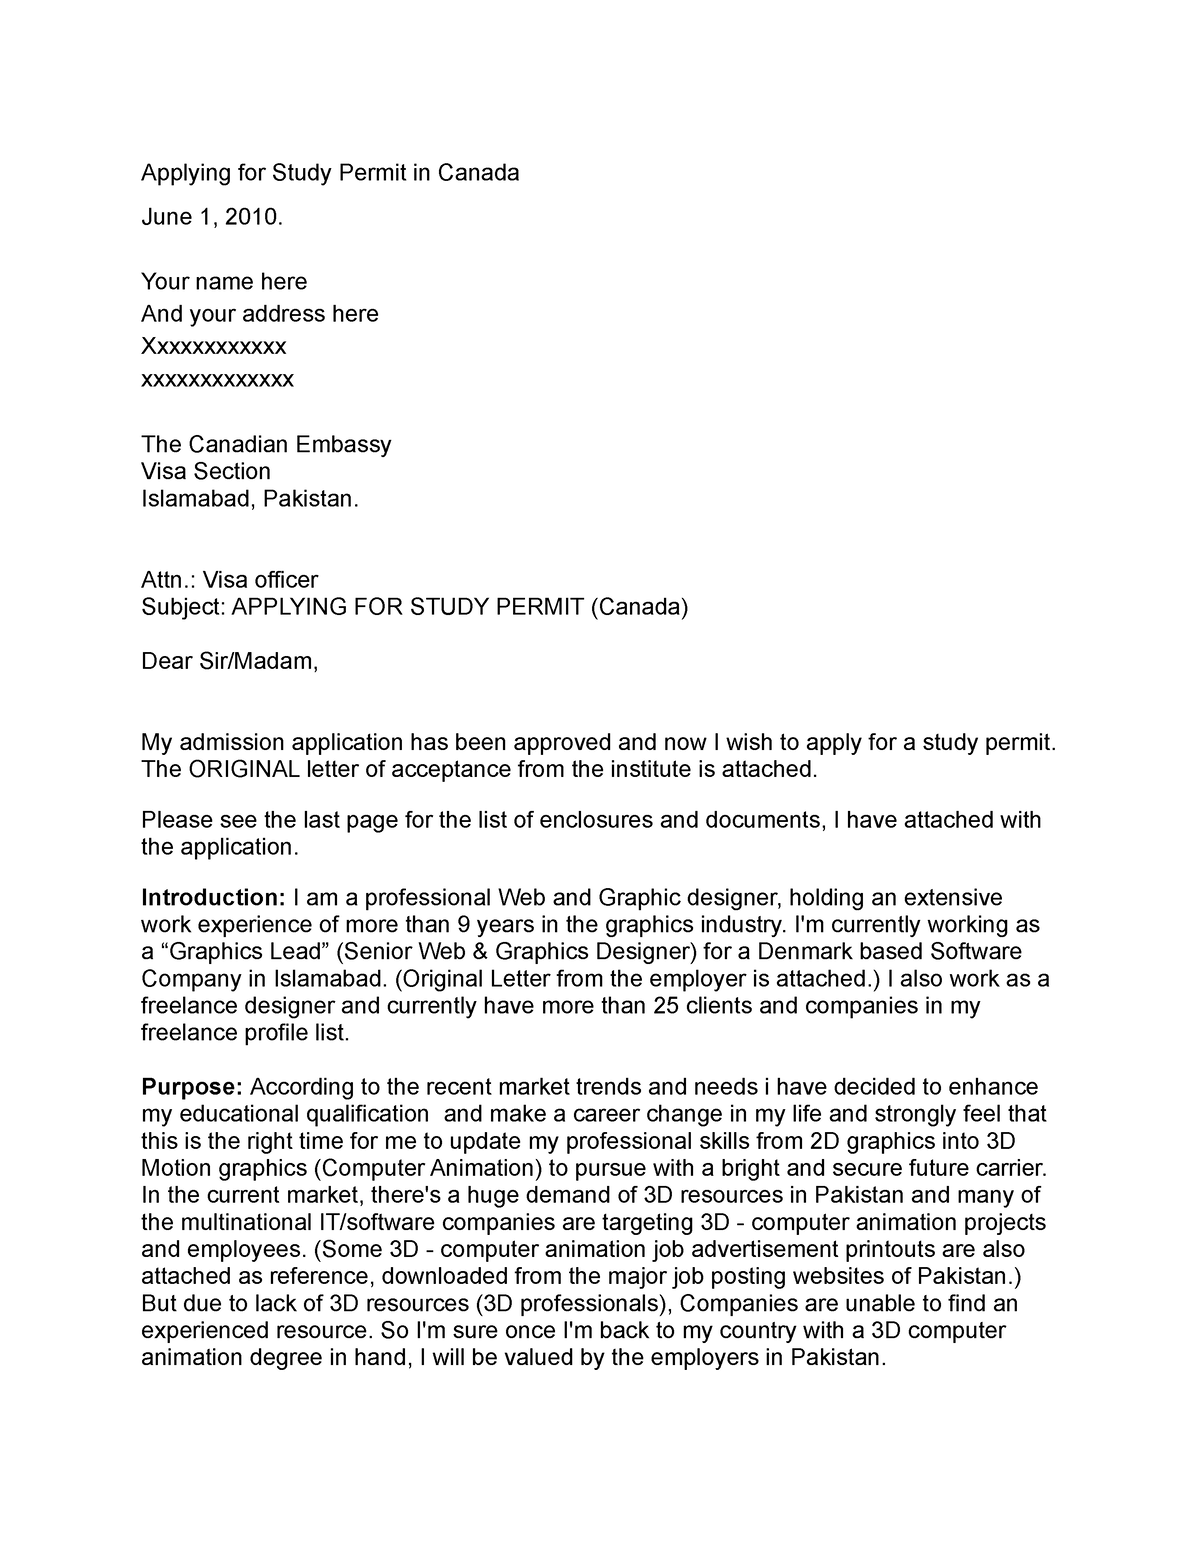 sample cover letter for study permit canada